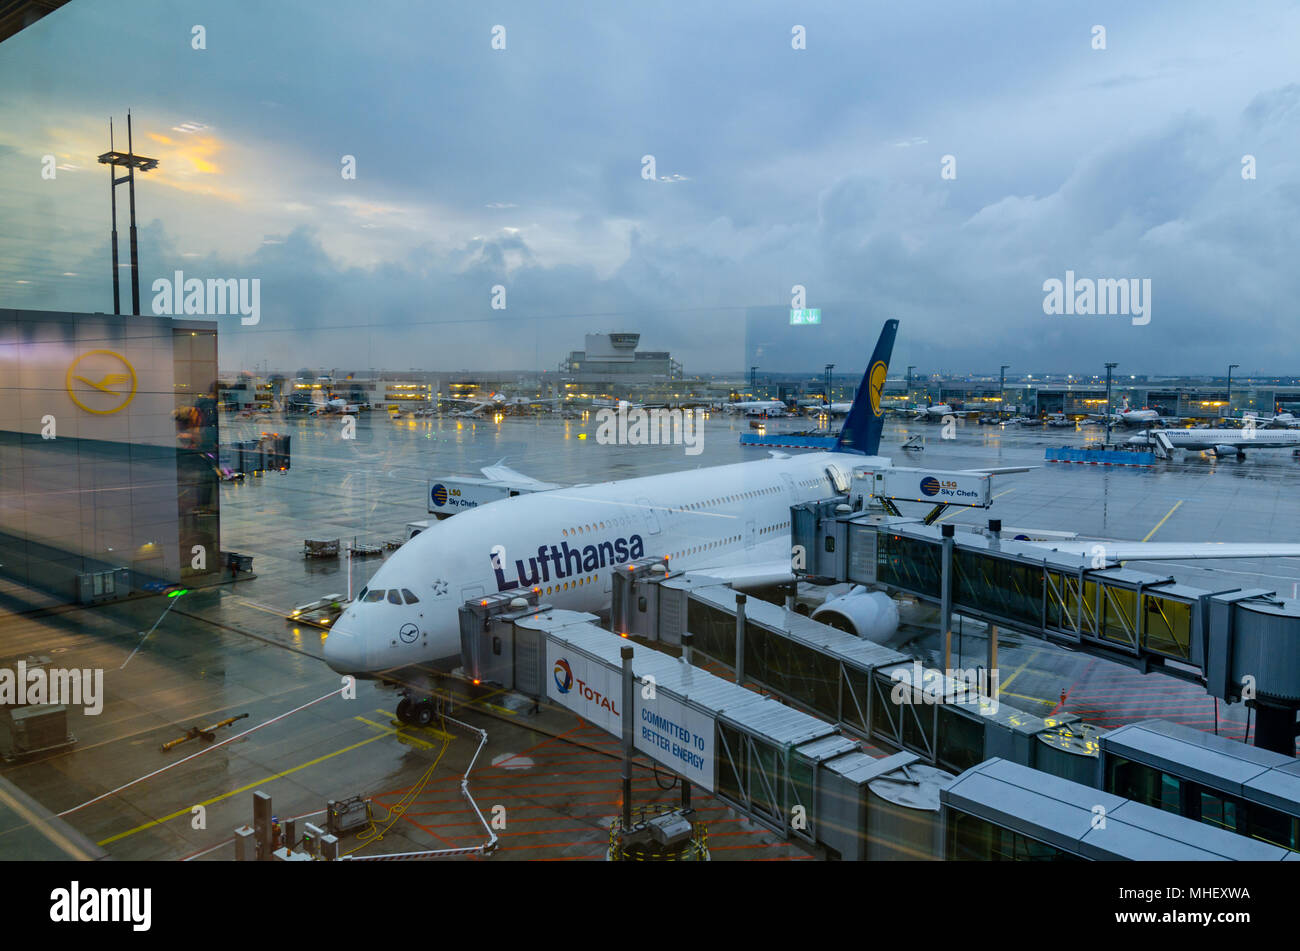 Airbus A380-800 of Lufthansa Airline preparing to take off at Frankfurt Airport of Germany. Lufthansa, is the largest German airline. Stock Photo